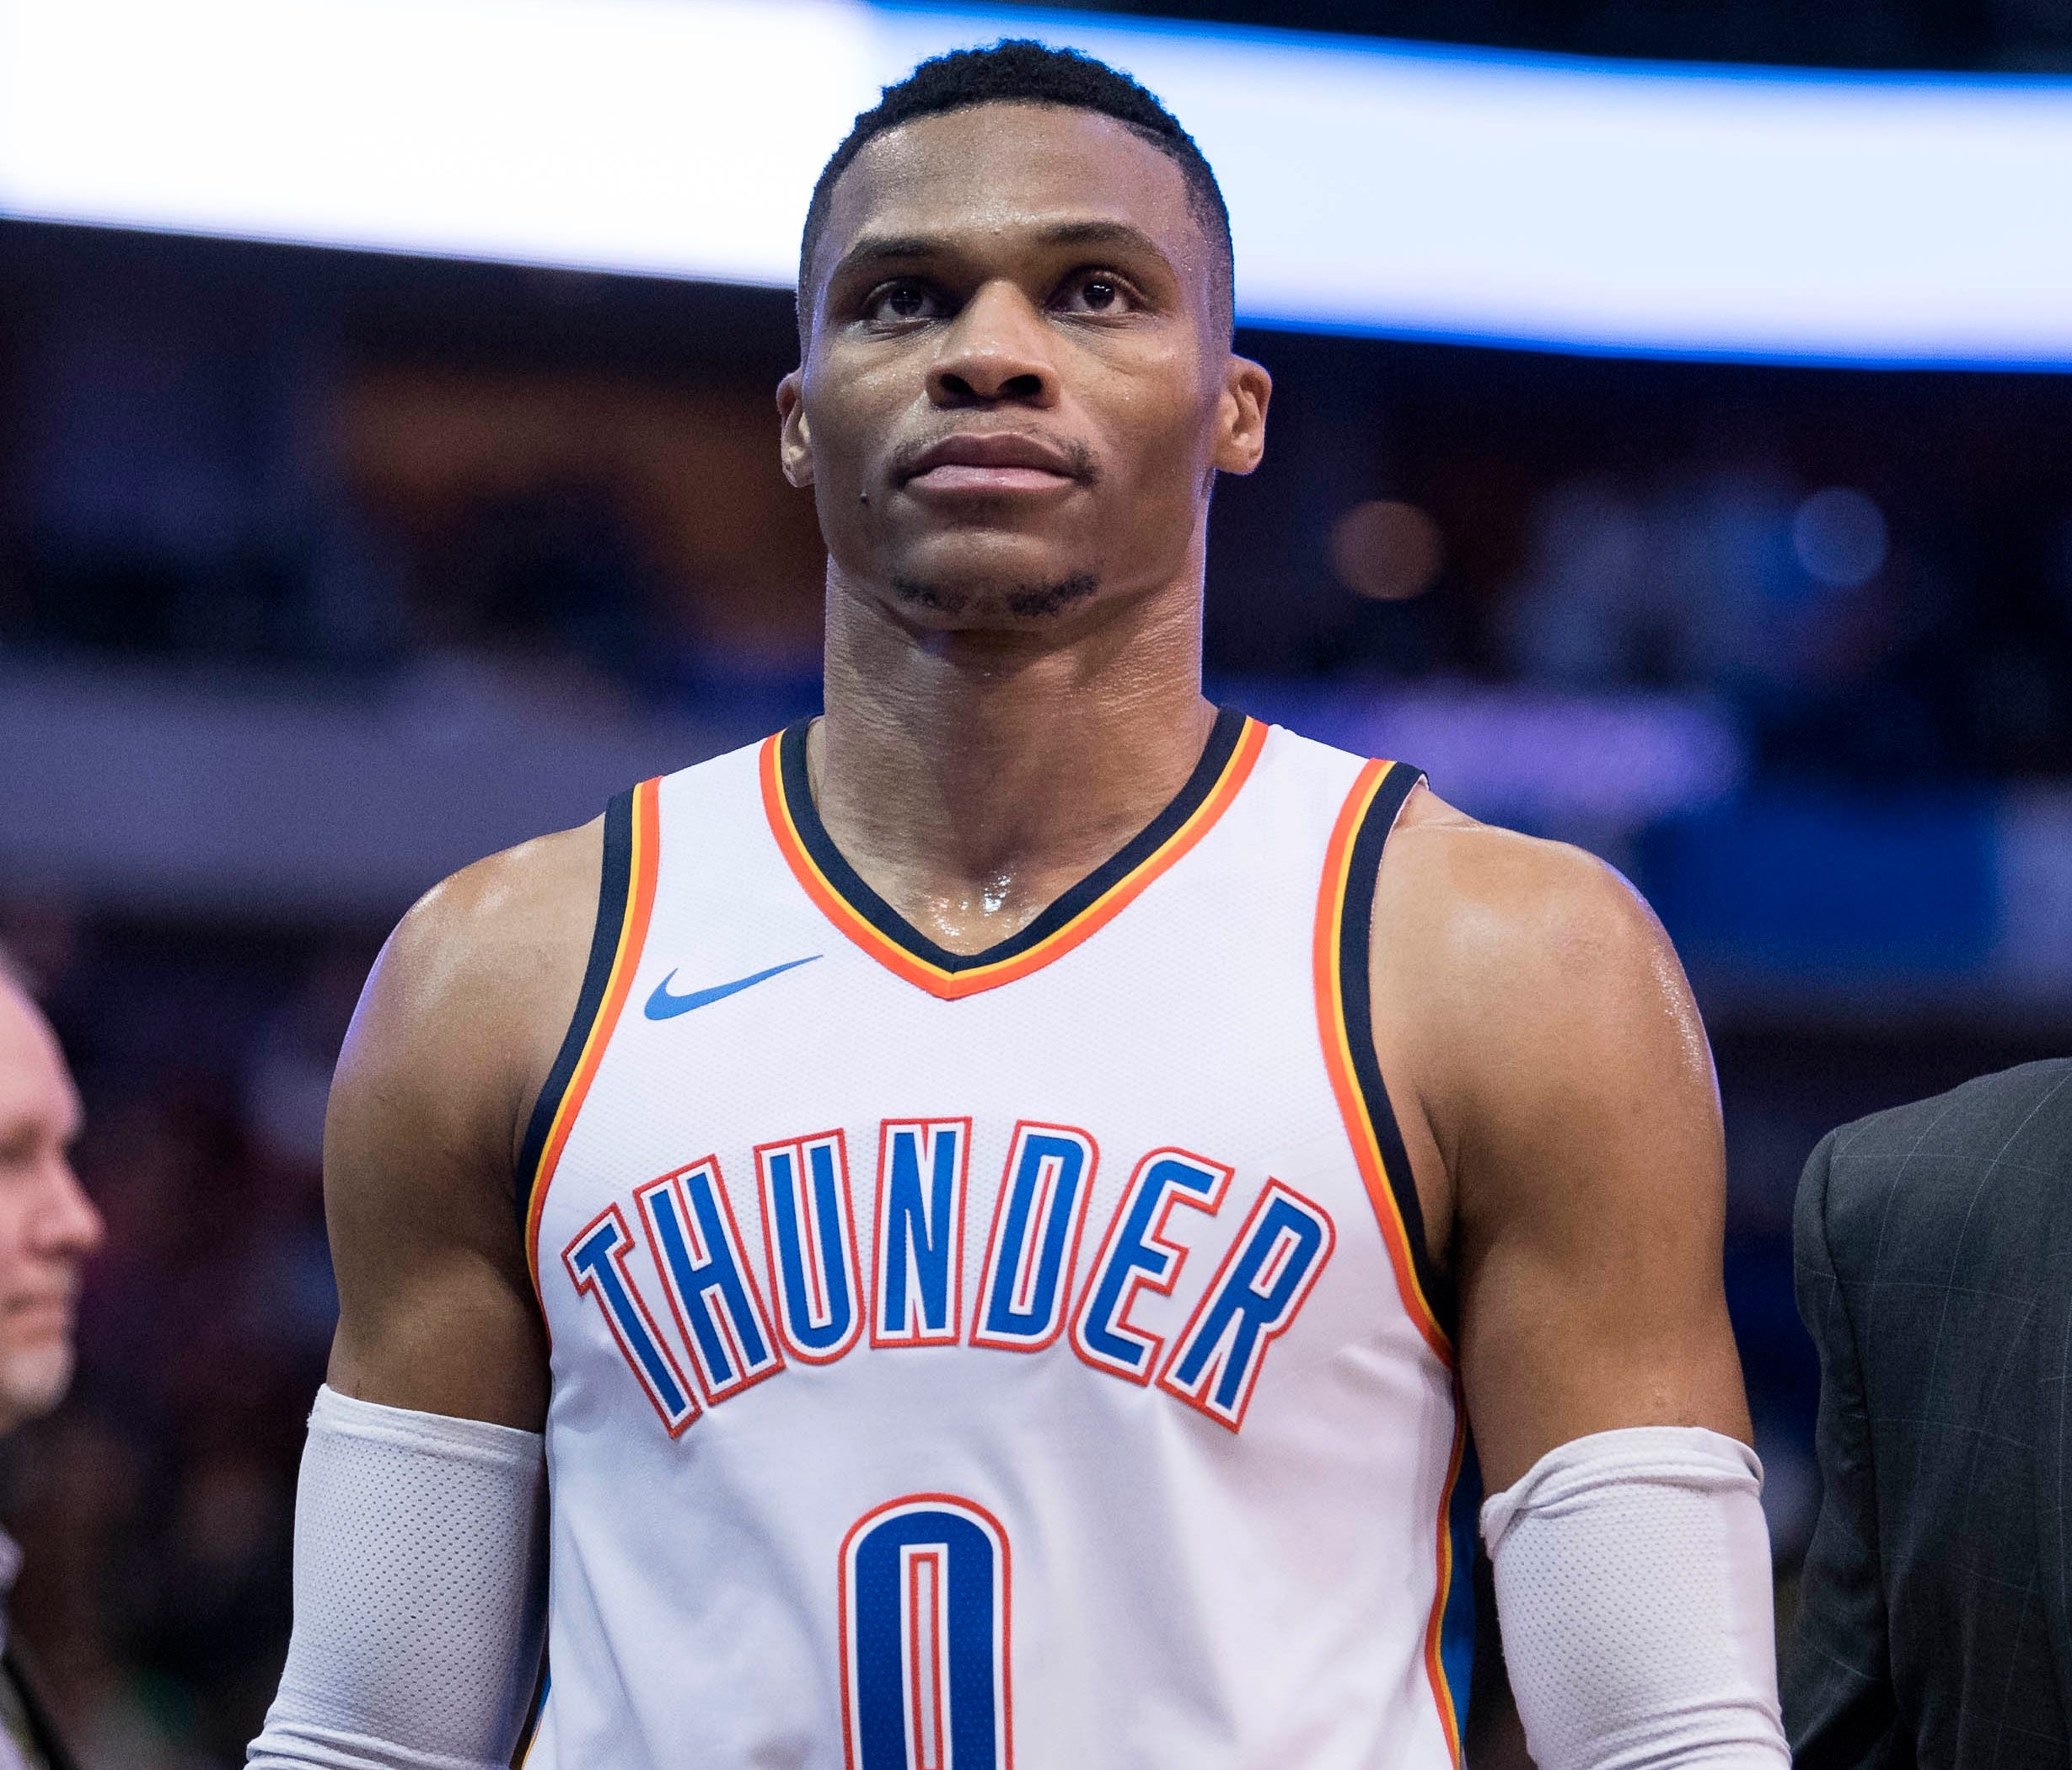 Russell Westbrook and the Thunder lost on a Nuggets buzzer-beater.